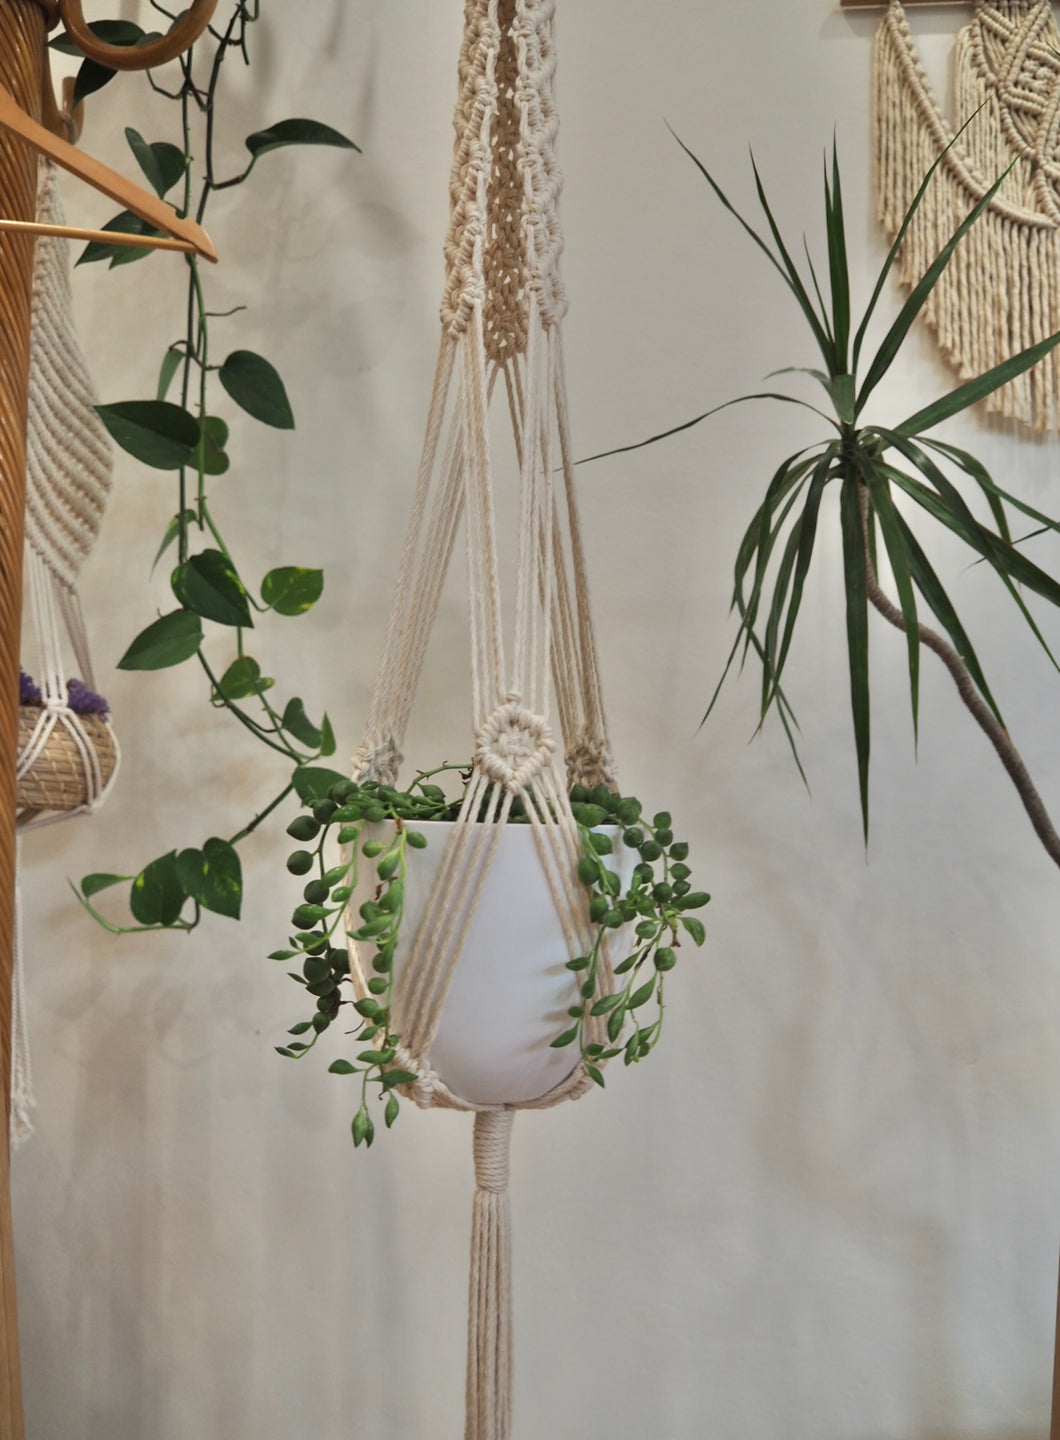 Macrame plant hanger with String of pearls, PidegoArt